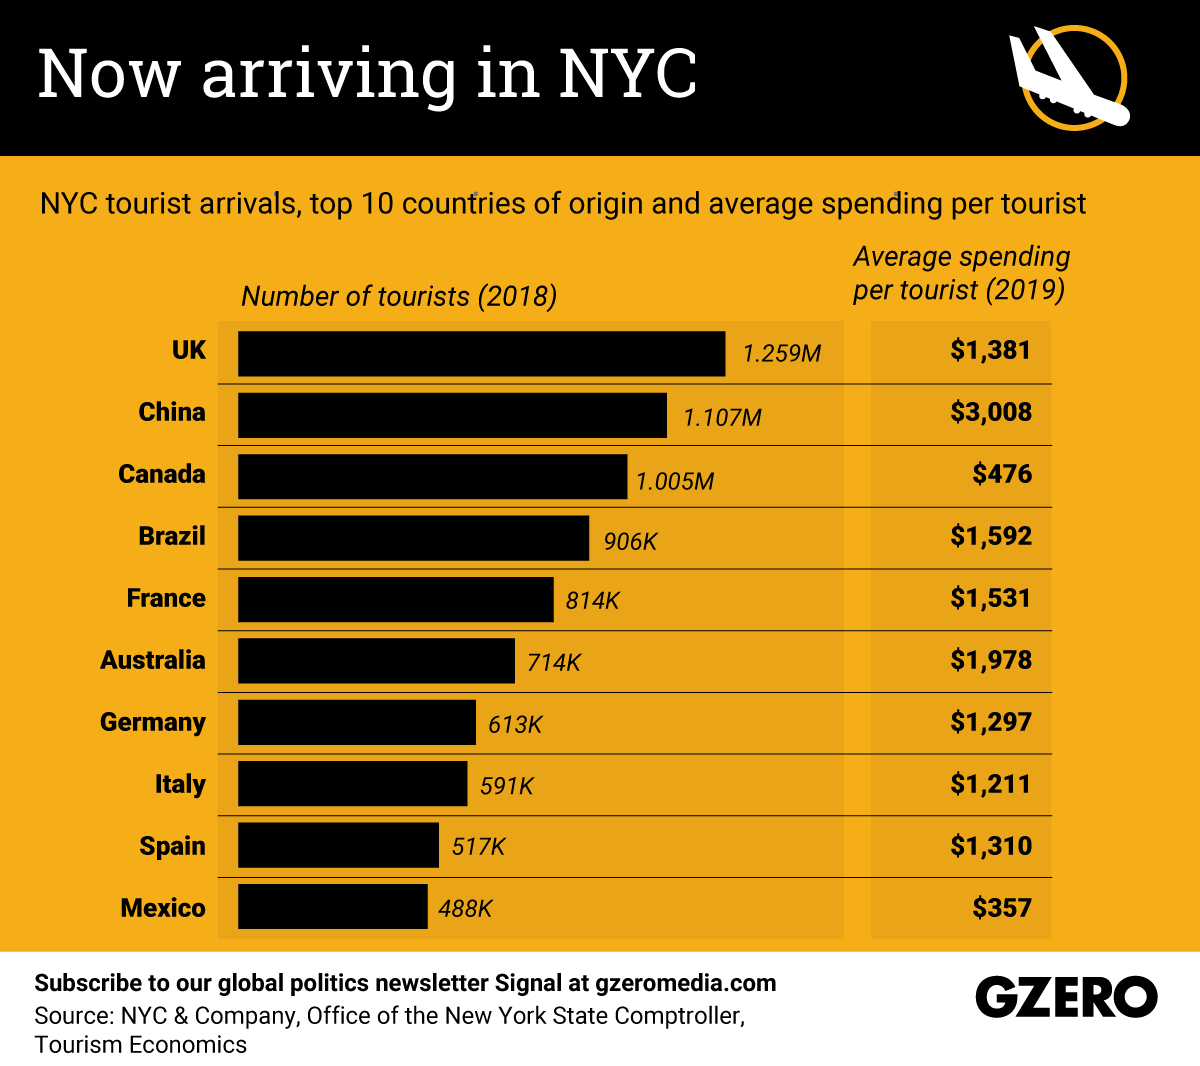 NYC tourist arrivals, top 10 countries of origin and average spending per tourist